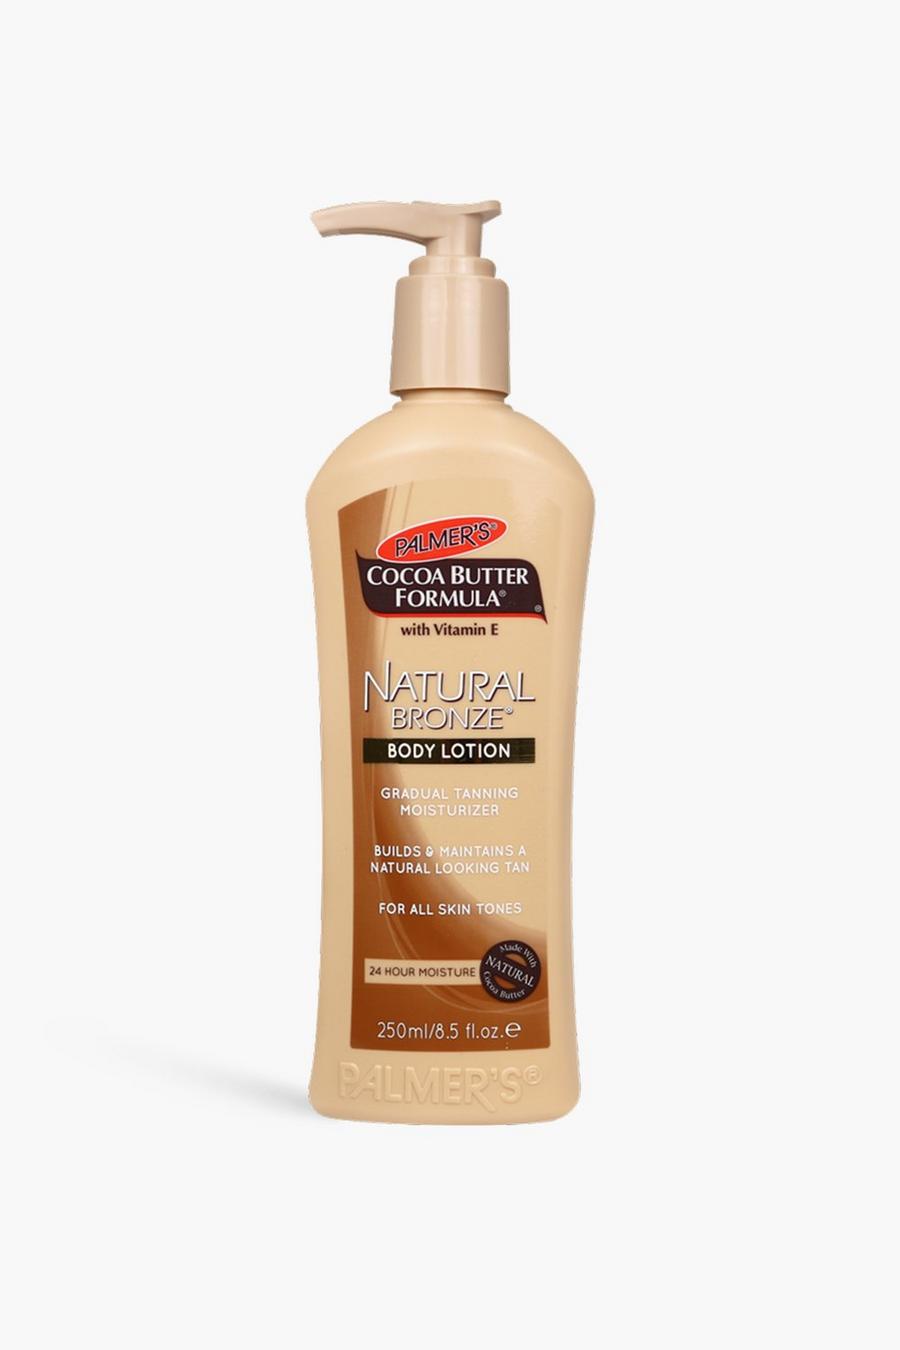 Clear clair Palmer’s Cocoa Butter Formula Gradual Tanning Lotion 250ml